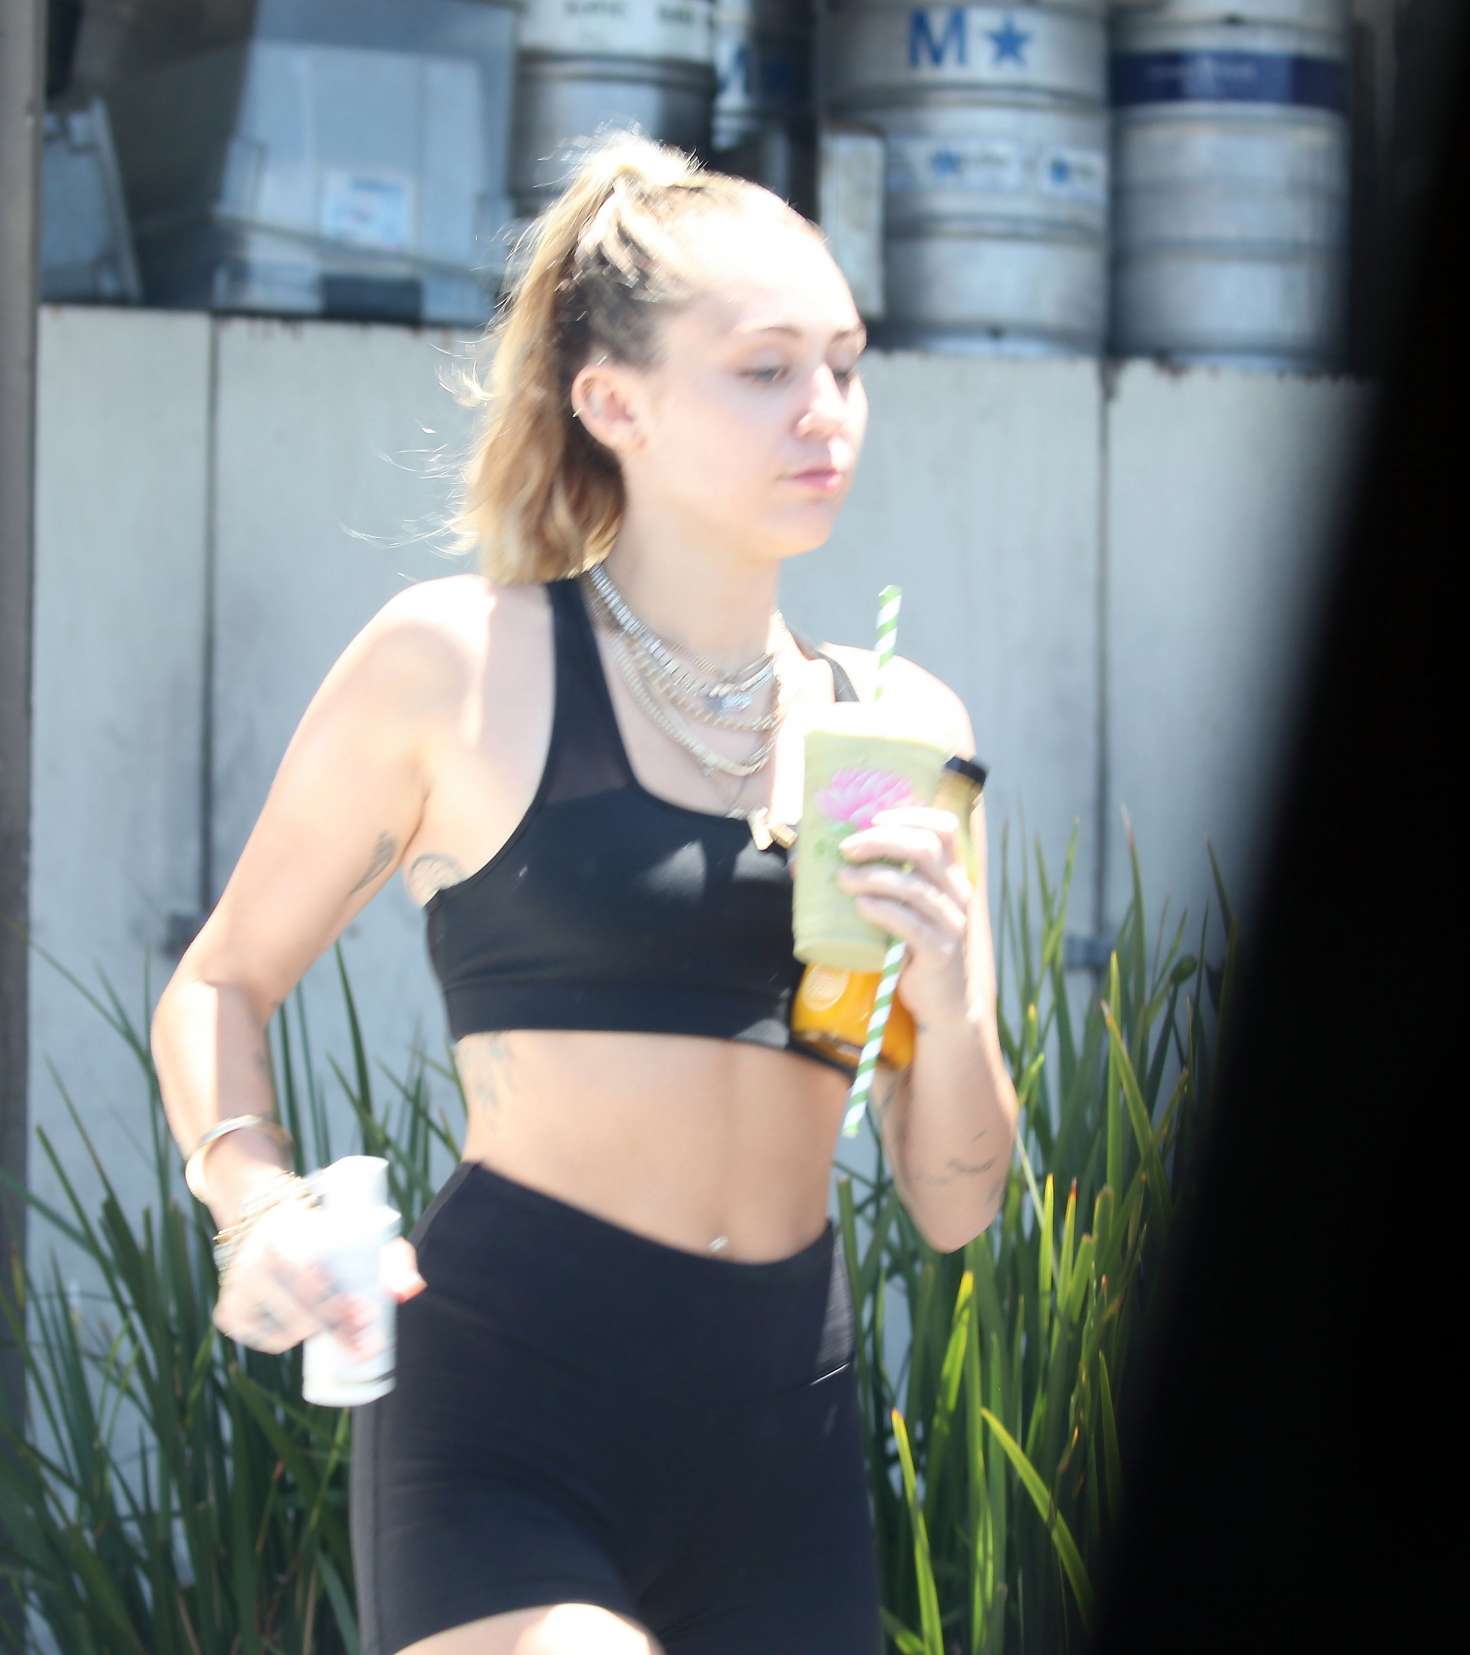 Miley Cyrus in Shorts and Sports Bra out in Malibu